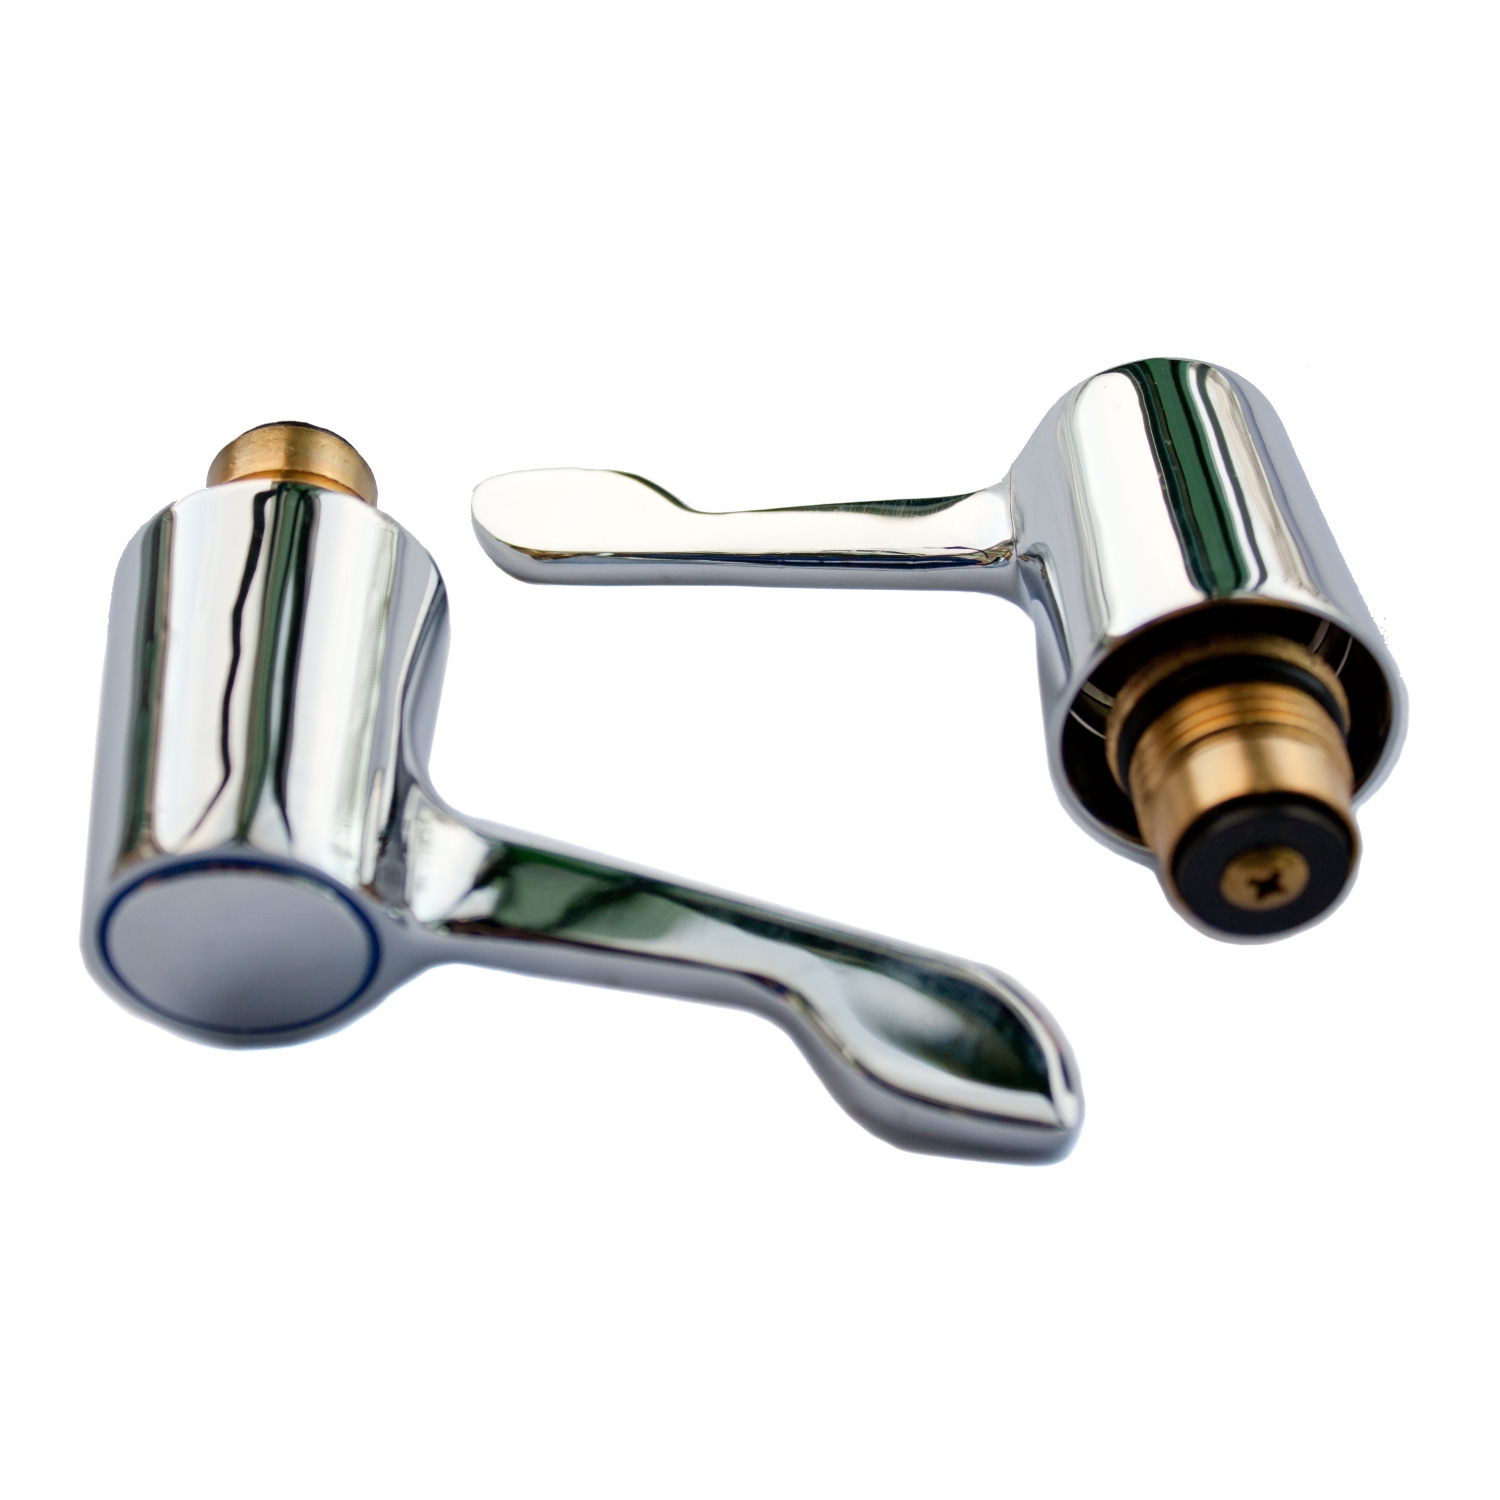 Oracstar Adapt-a-Tap 1/2 inch Lever Set Image